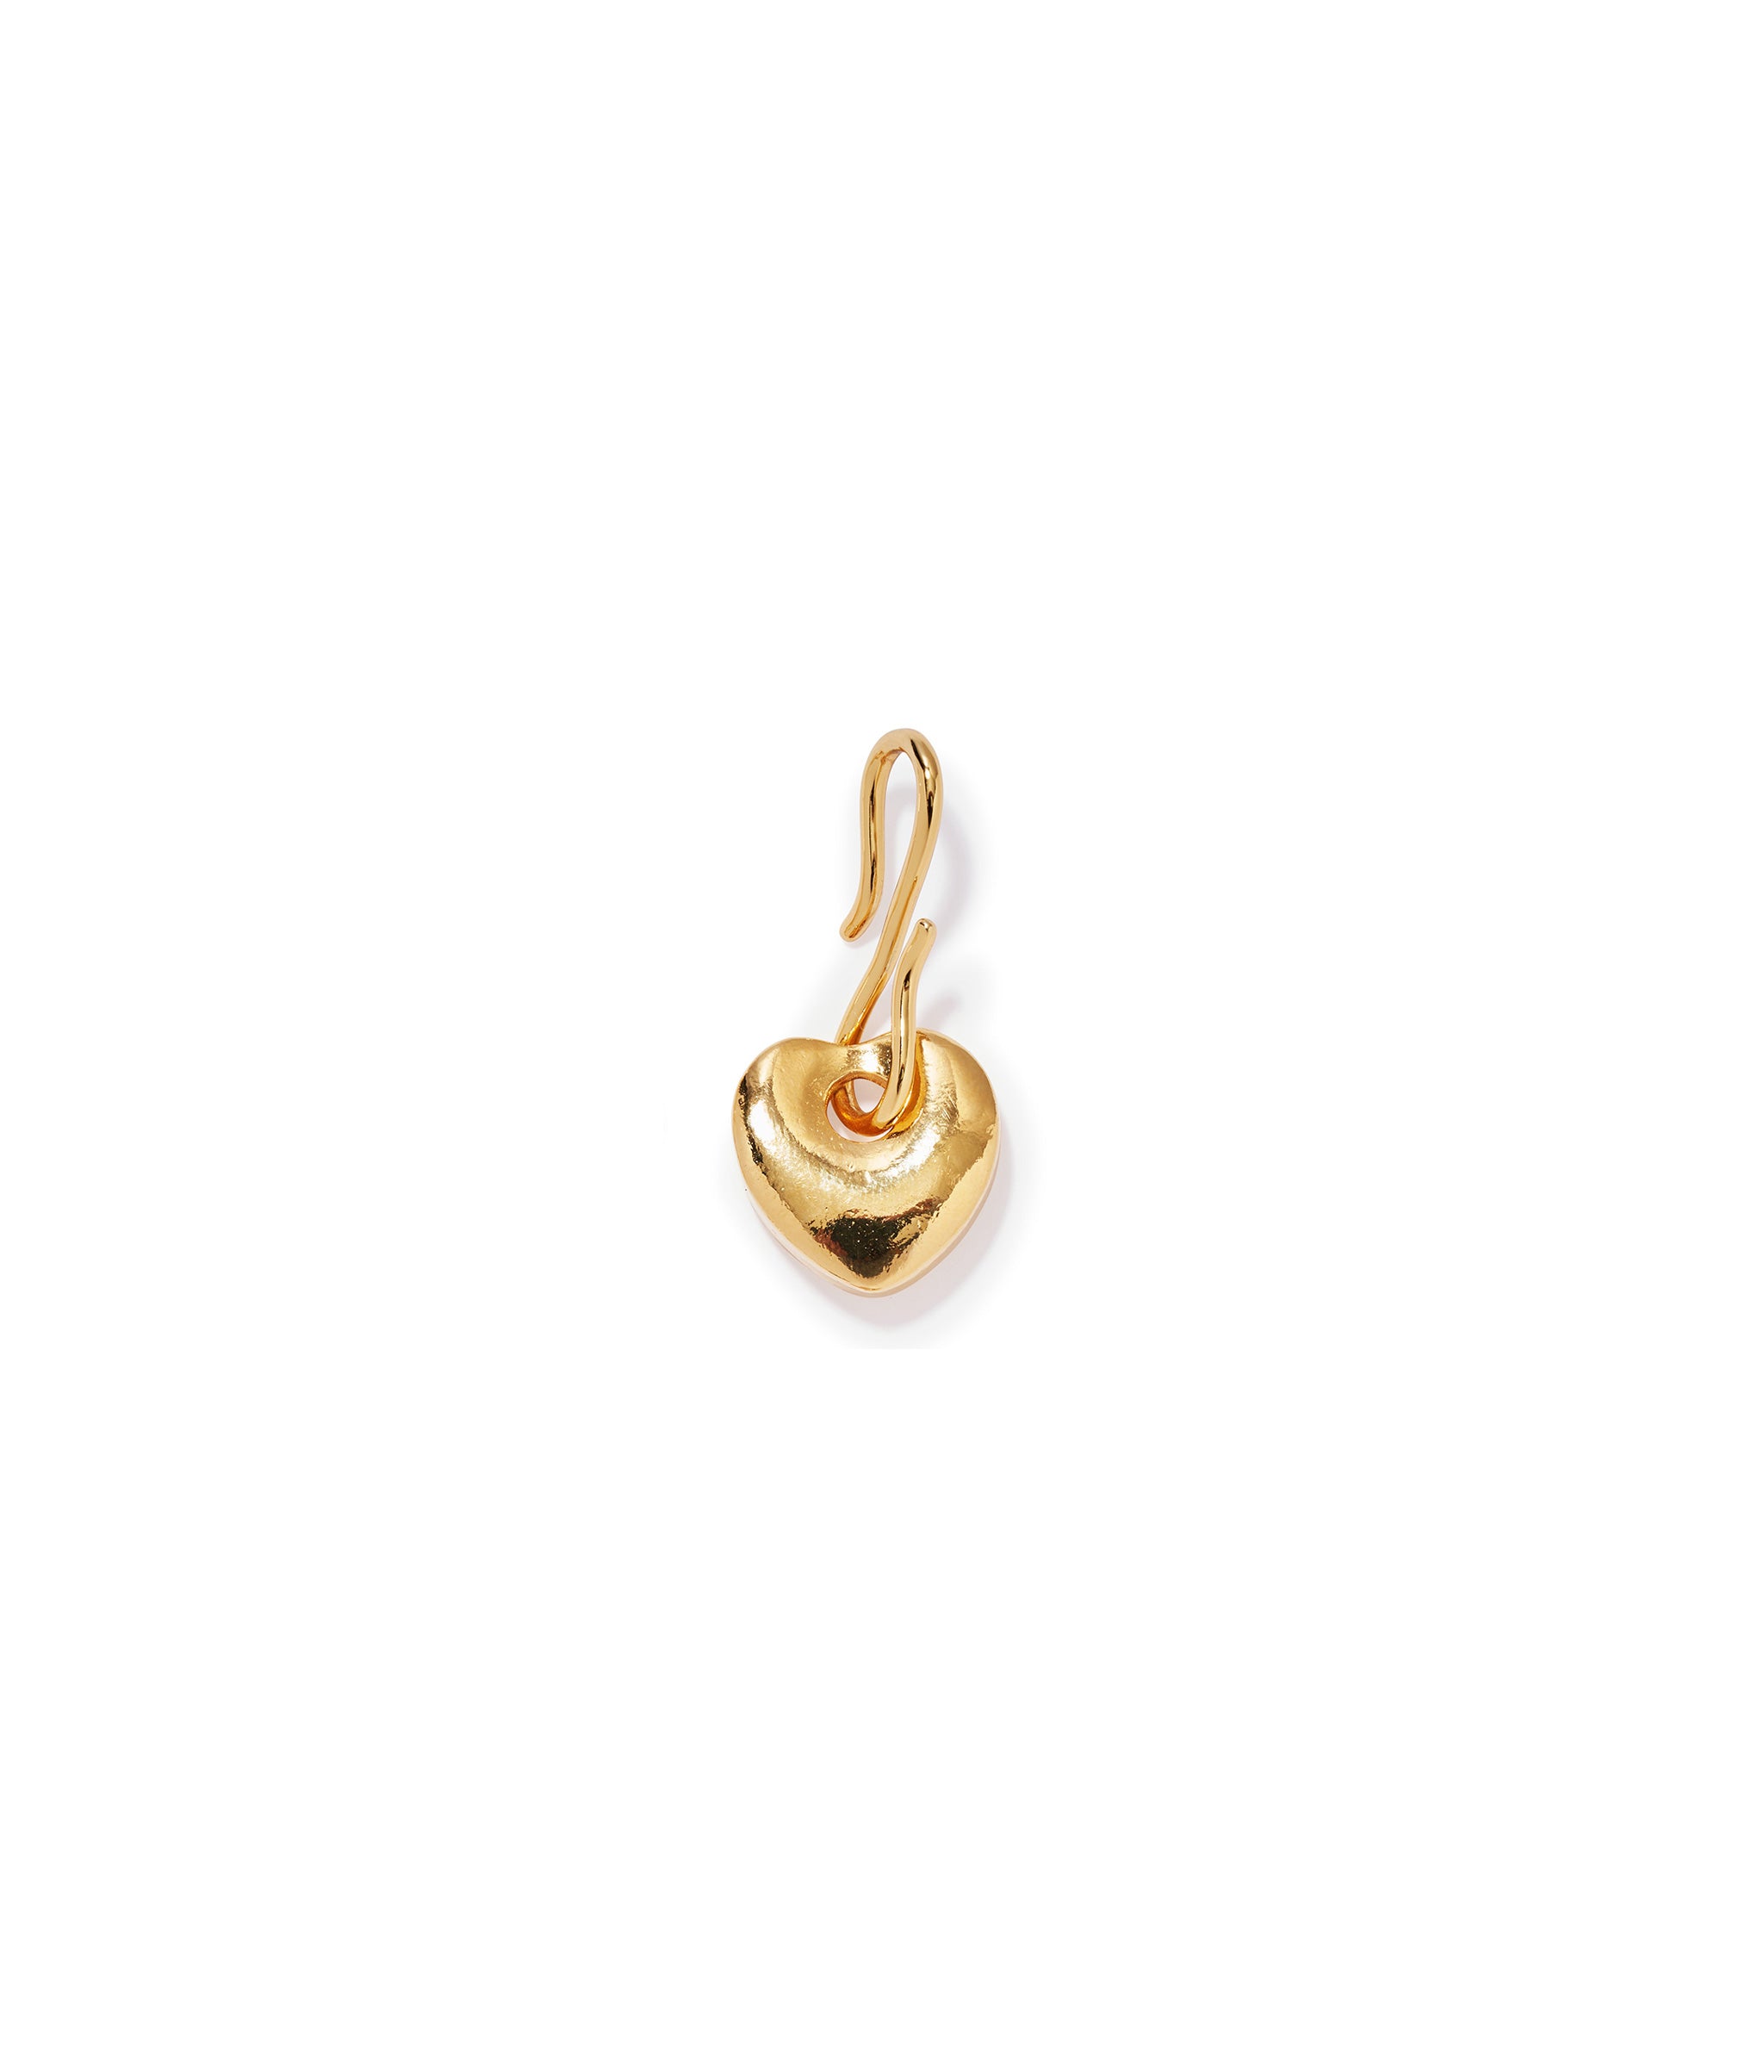 Golden Love Charm. Puffy heart charm in gold-plated brass and resin with gold S-hook.